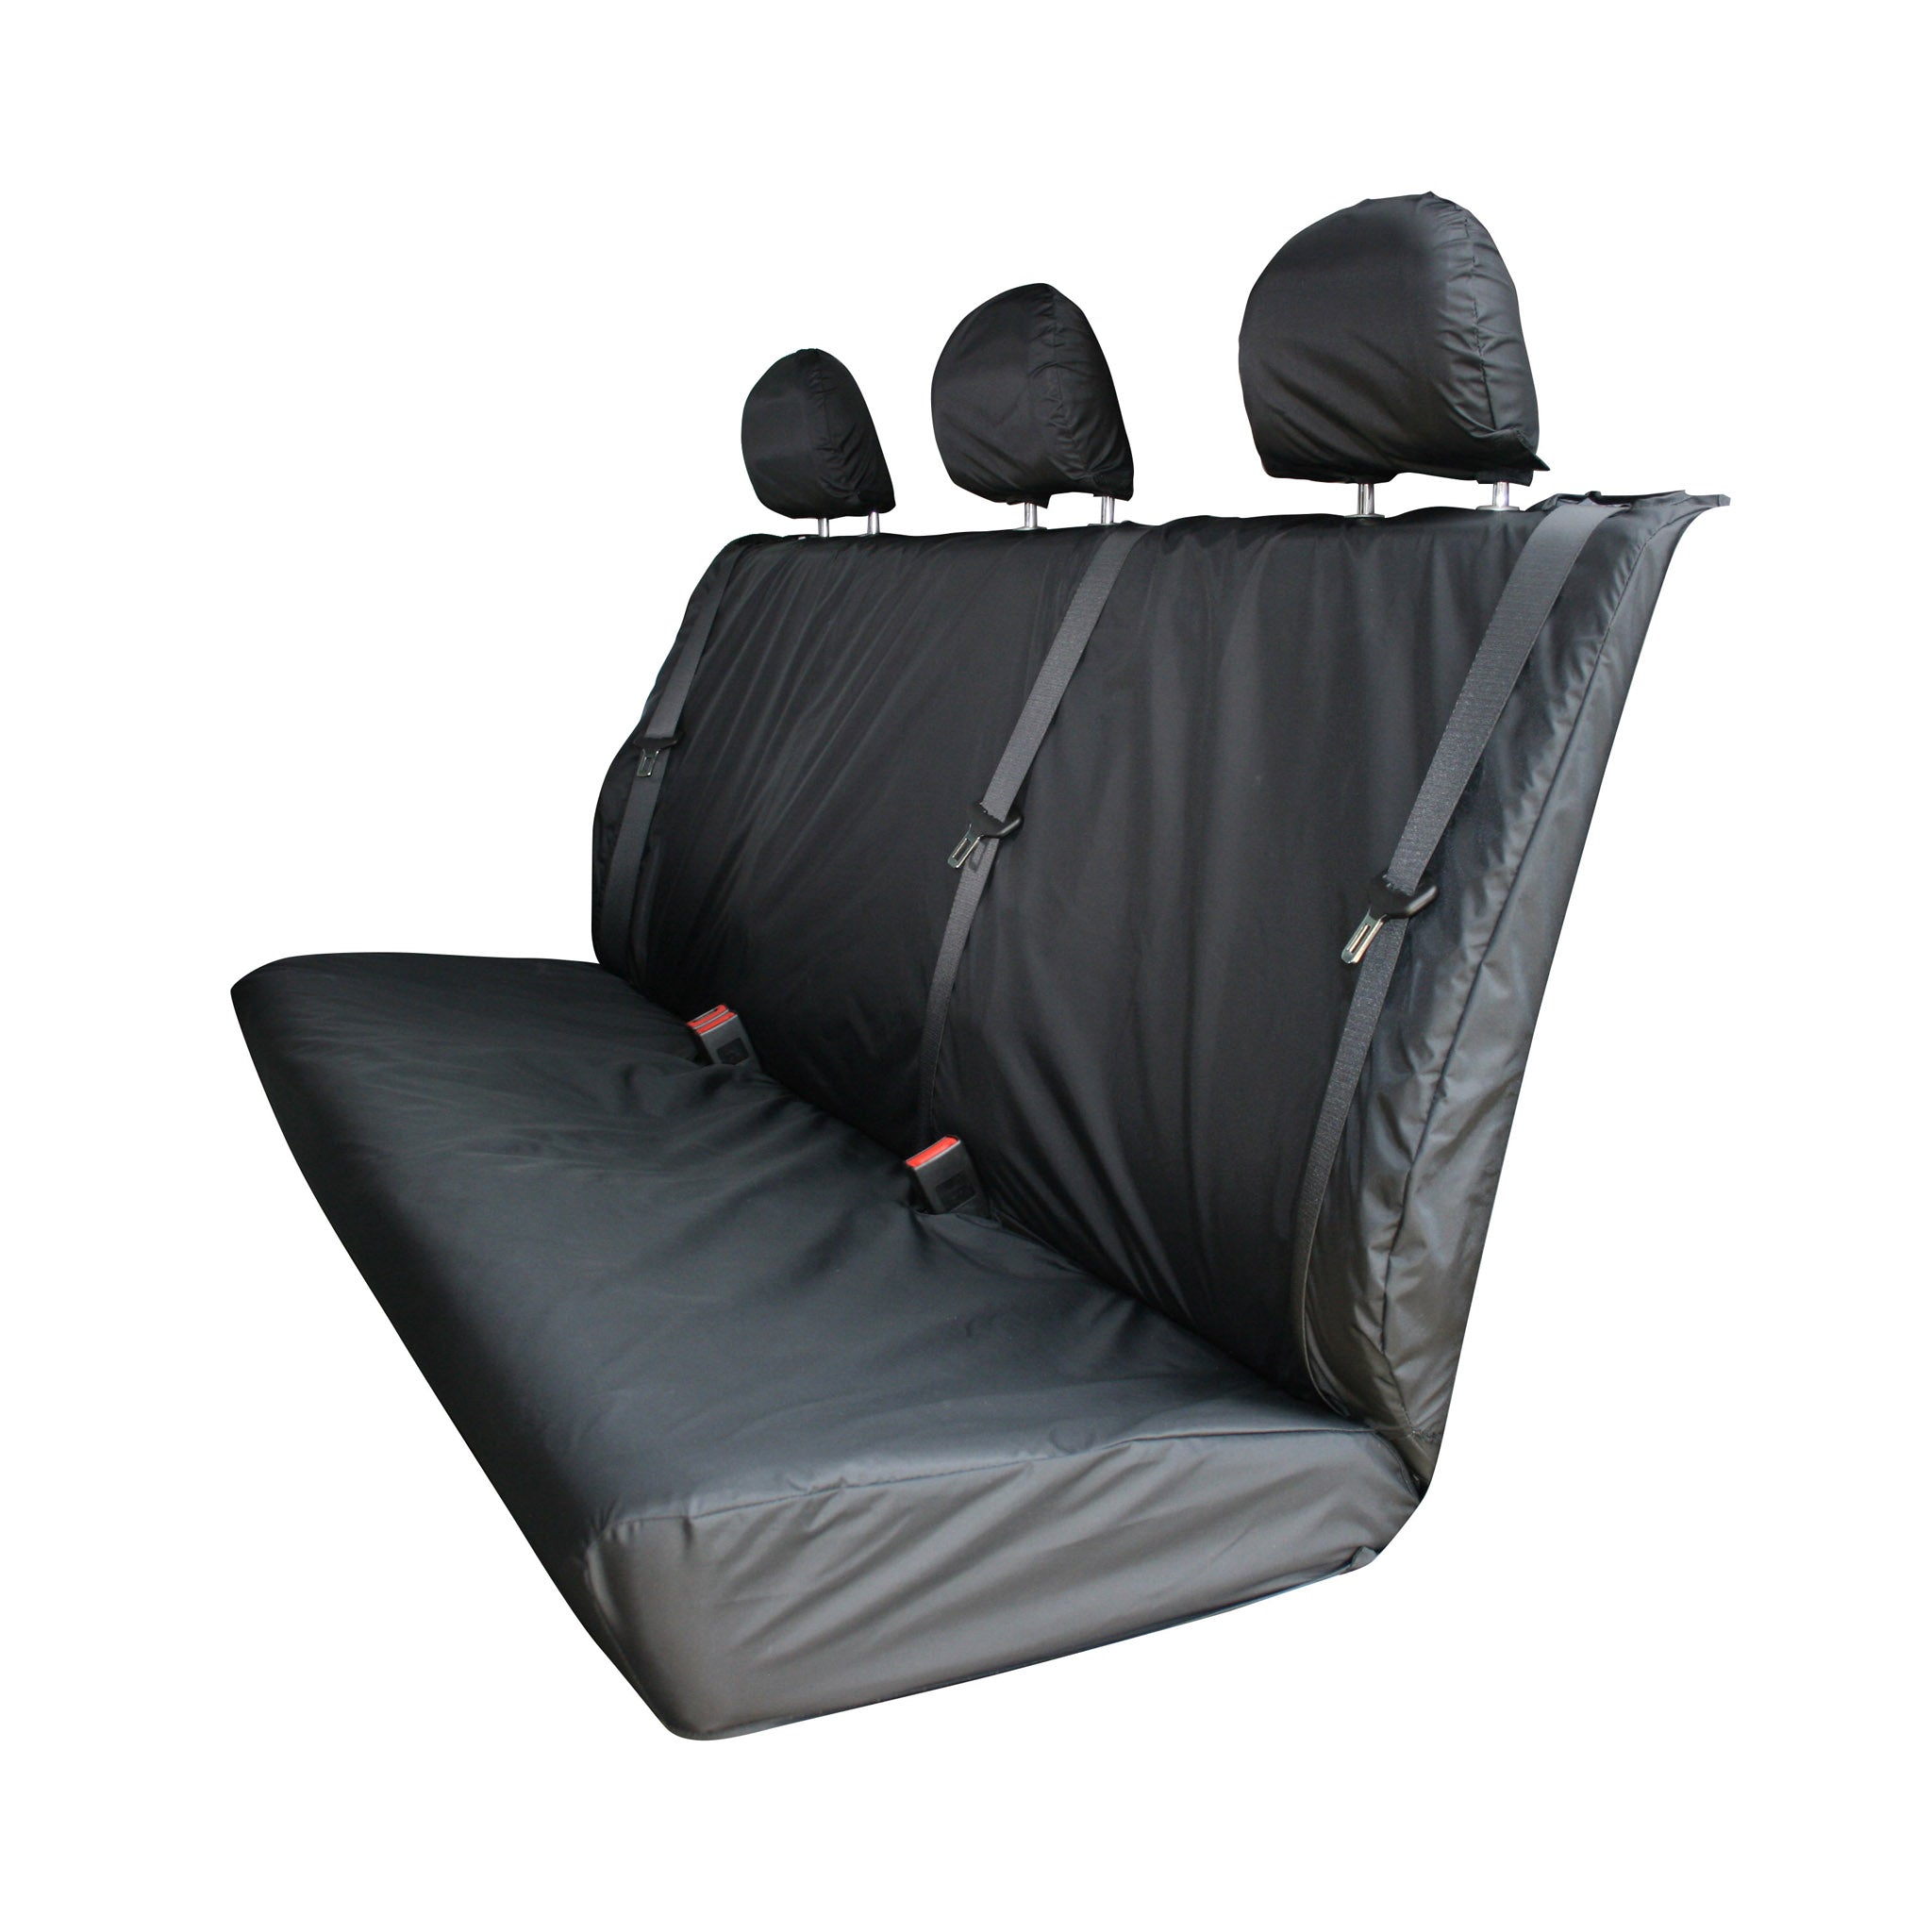 Peugeot Boxer Seat Covers